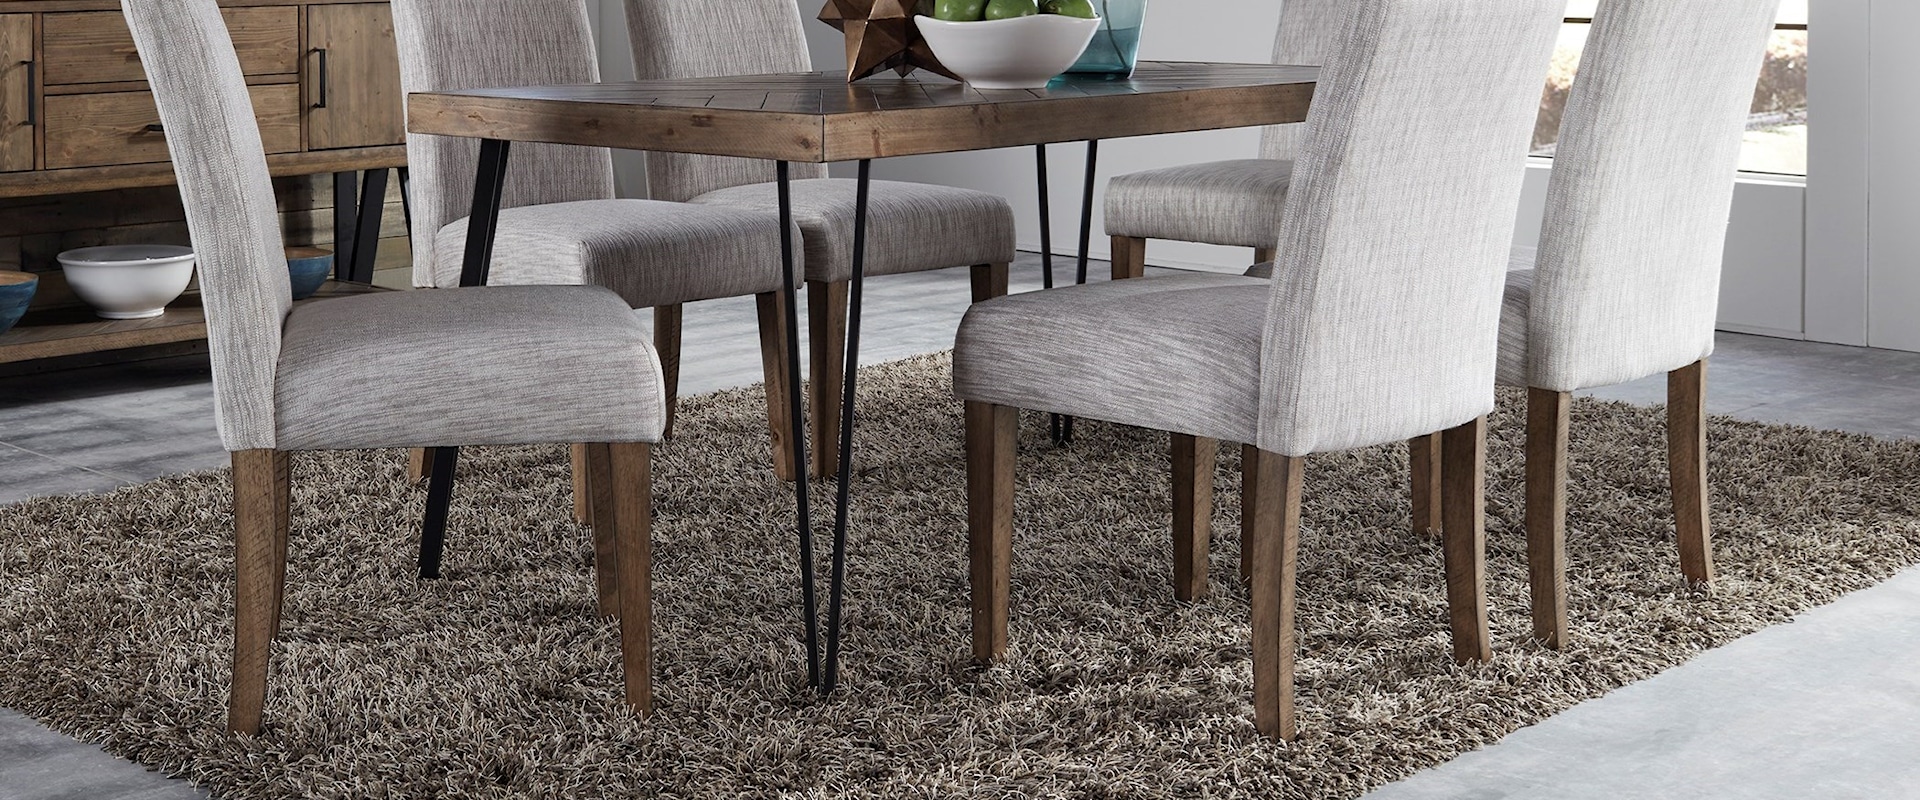 Contemporary Table and Upholstered Chair Set with Herringbone Parquet Pattern